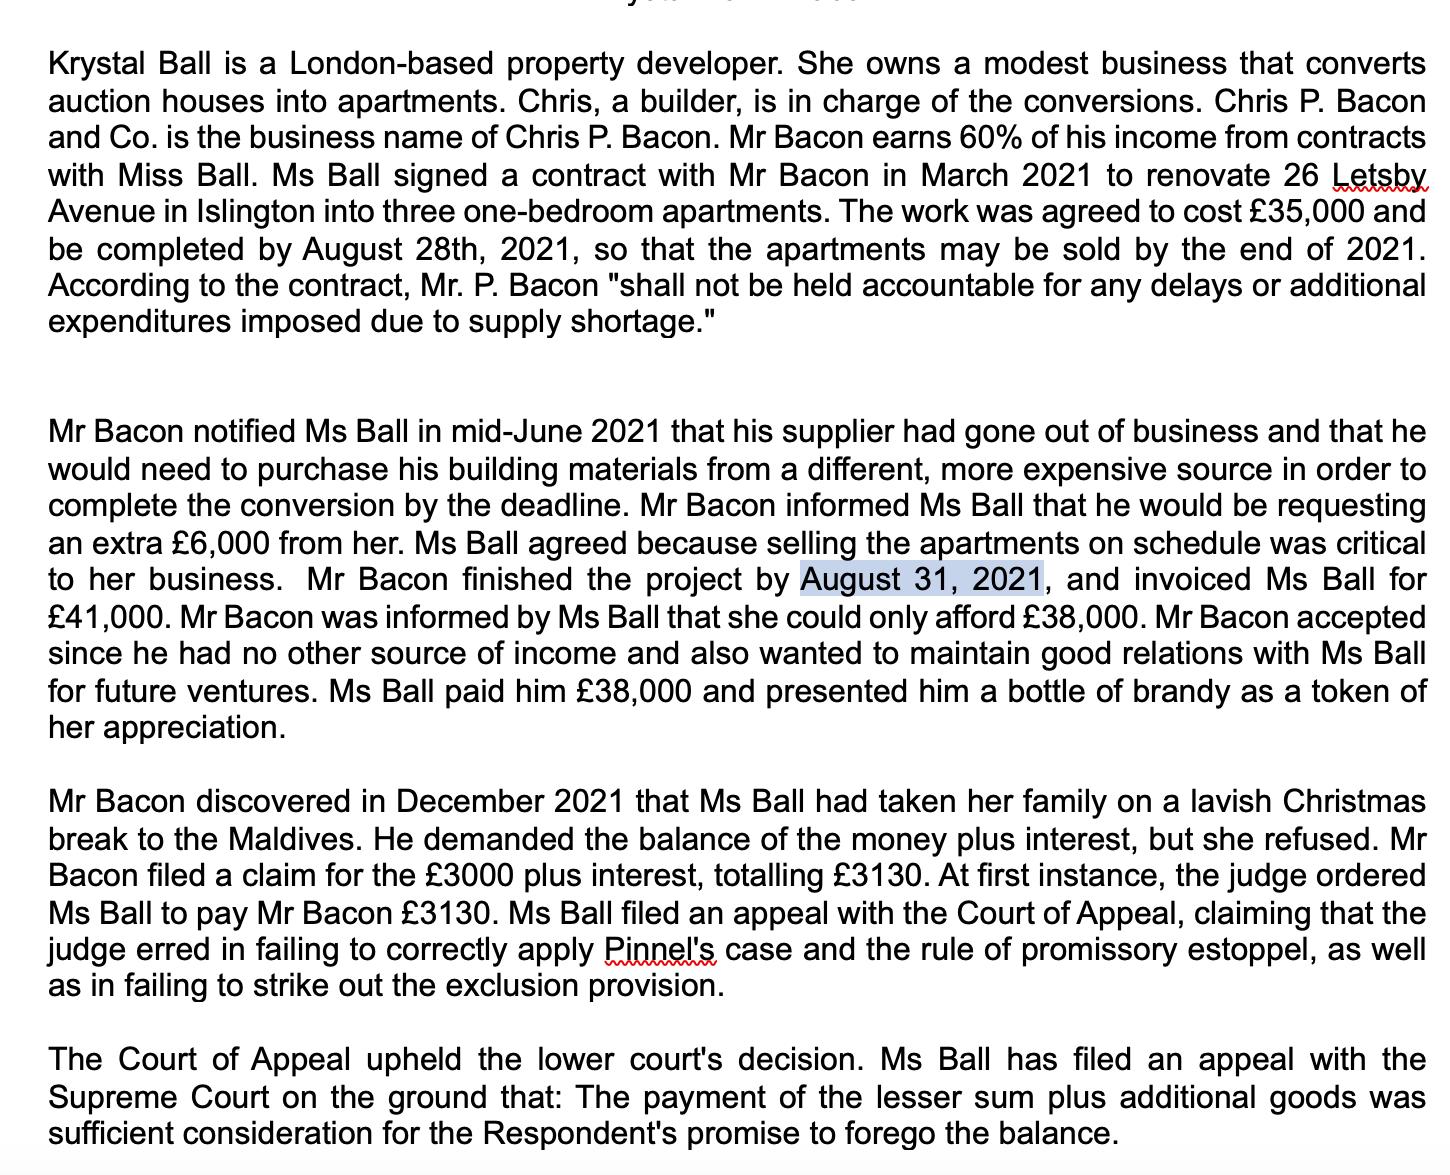 Krystal Ball is a London-based property developer. She owns a modest business that converts auction houses